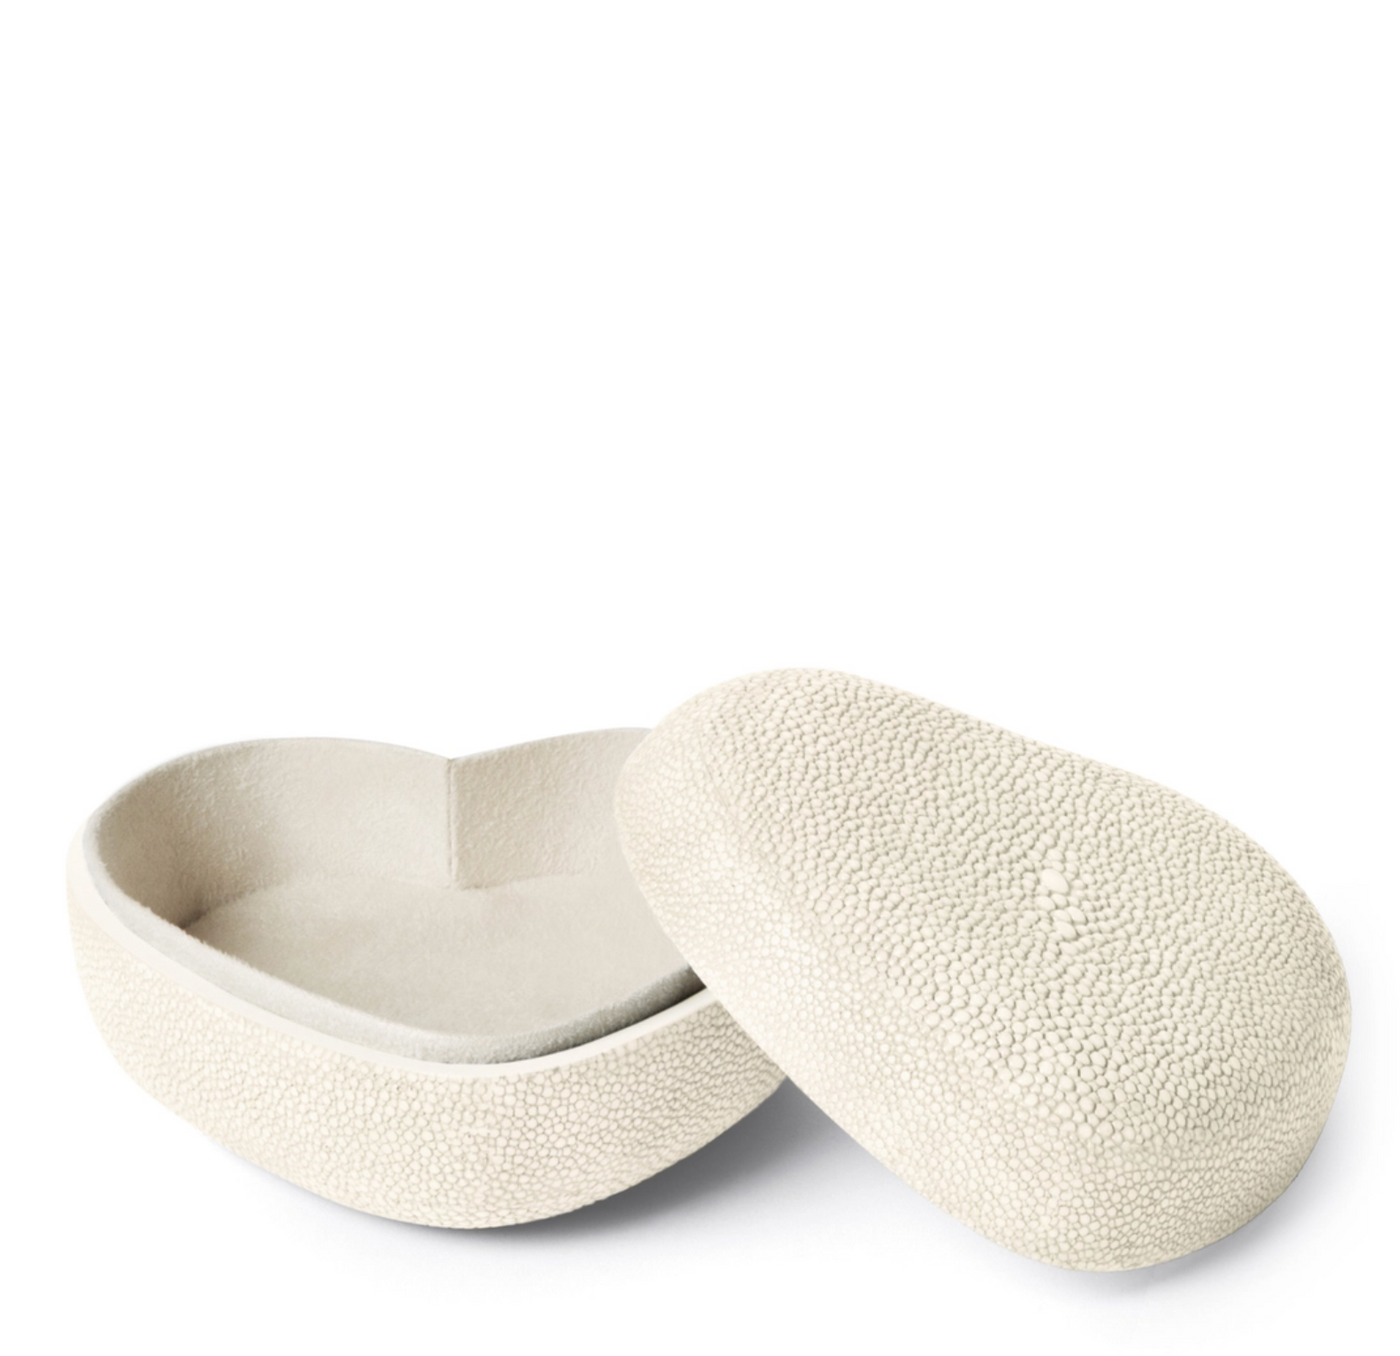 AERIN HEART BOX SHAGREEN (Available in 2 Colors)